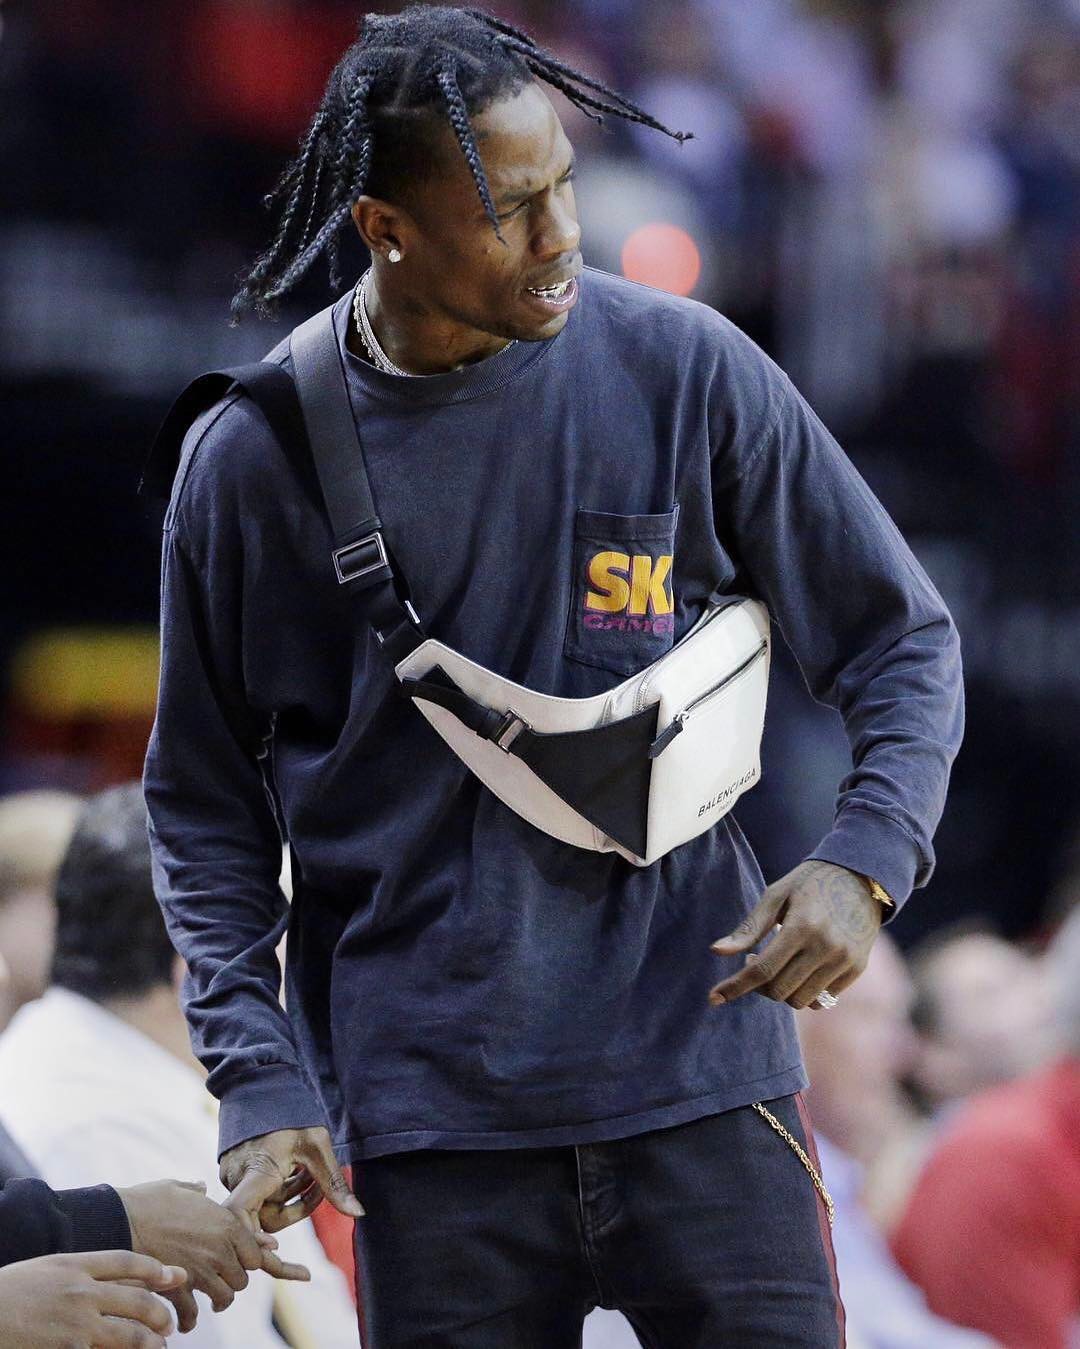 SPOTTED: Travis Scott in Balenciaga Jeans and Bag